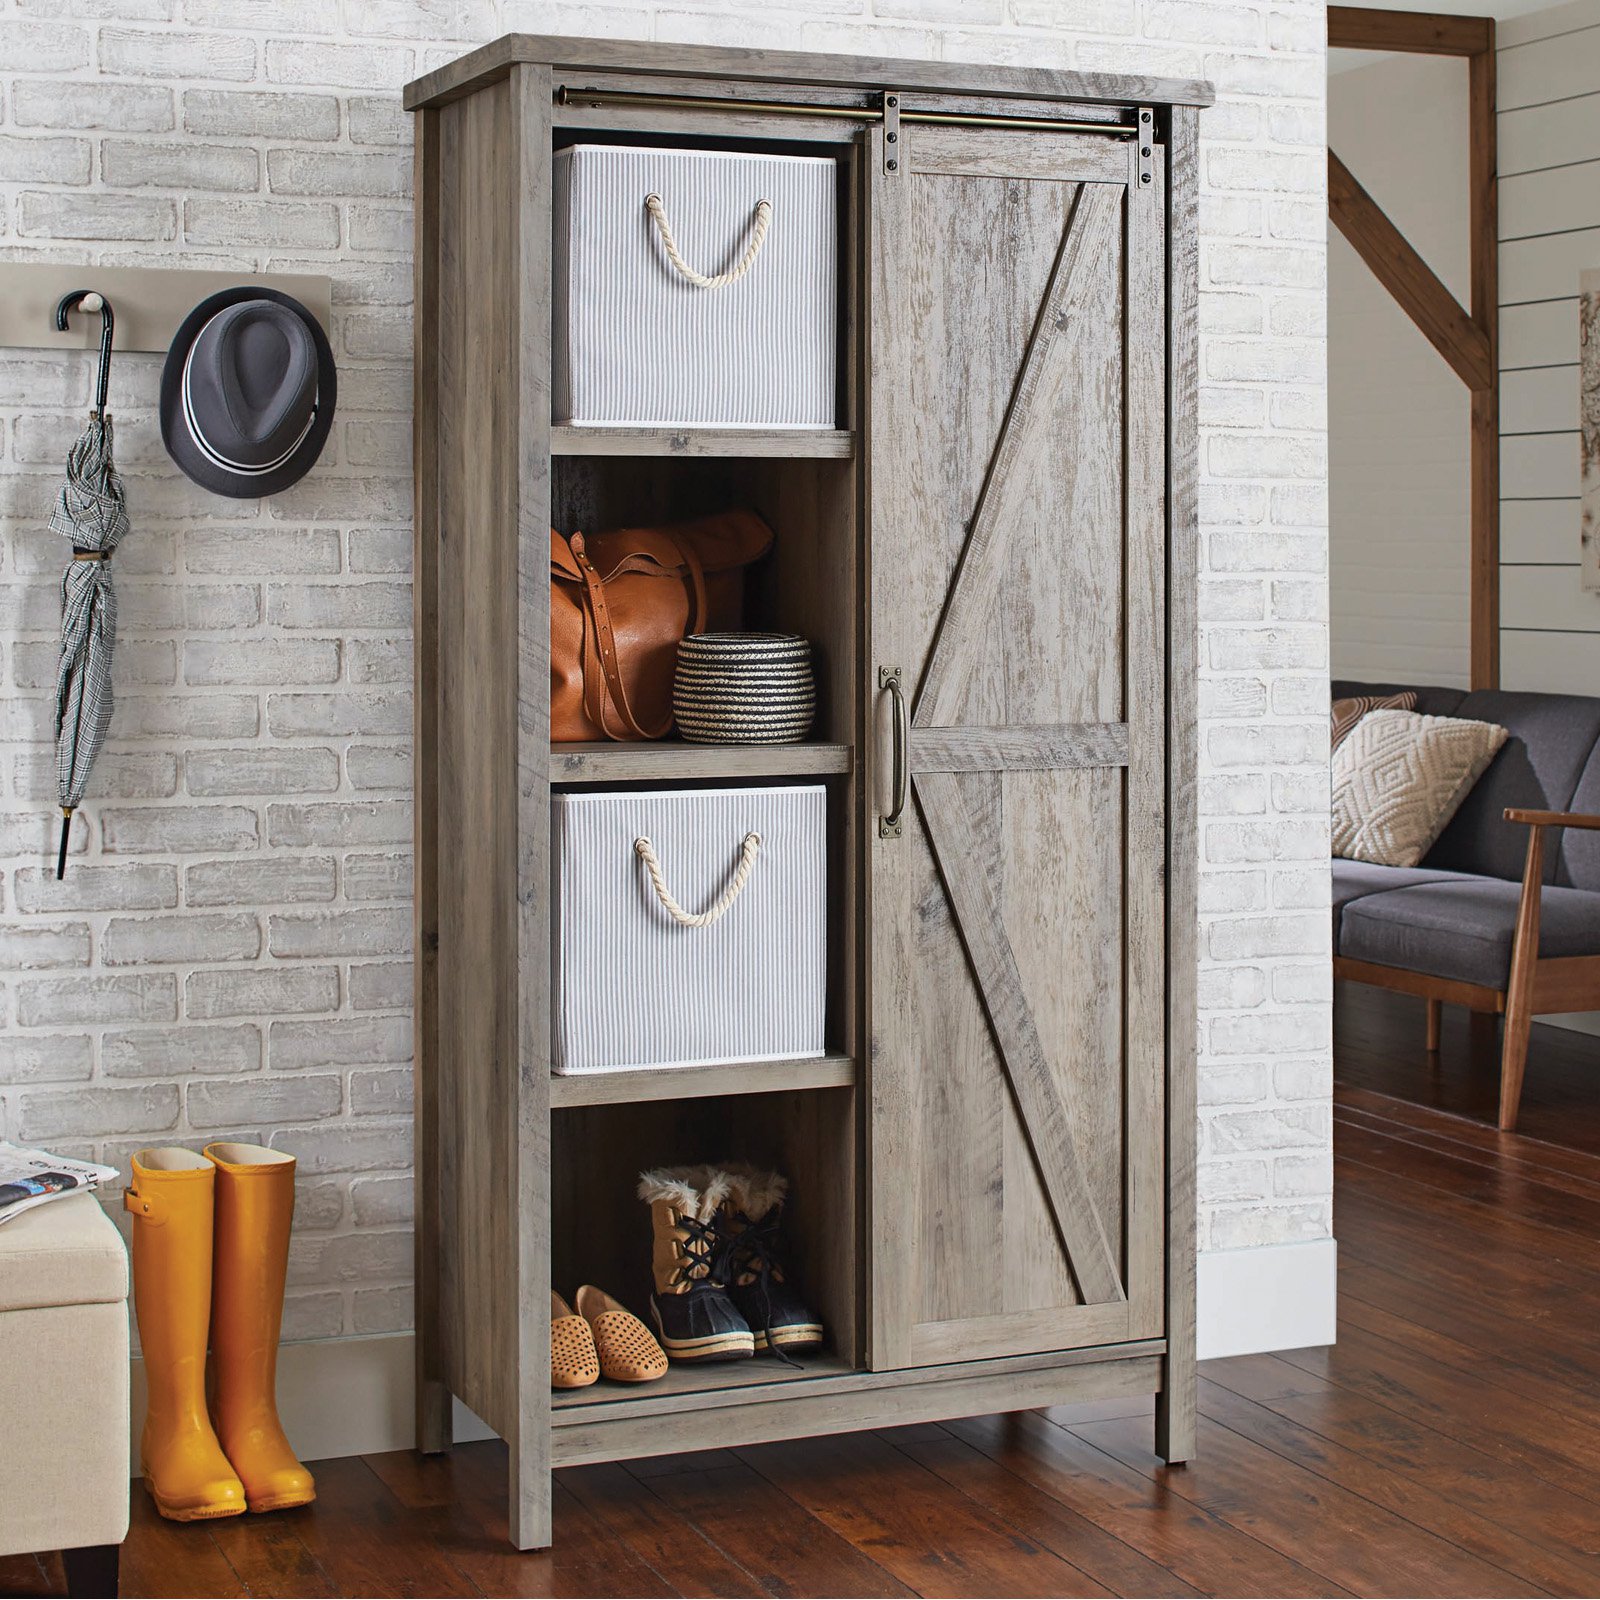 Better Homes & Gardens 66" Modern Farmhouse Bookcase Storage Cabinet, Rustic Gray Finish - image 5 of 8